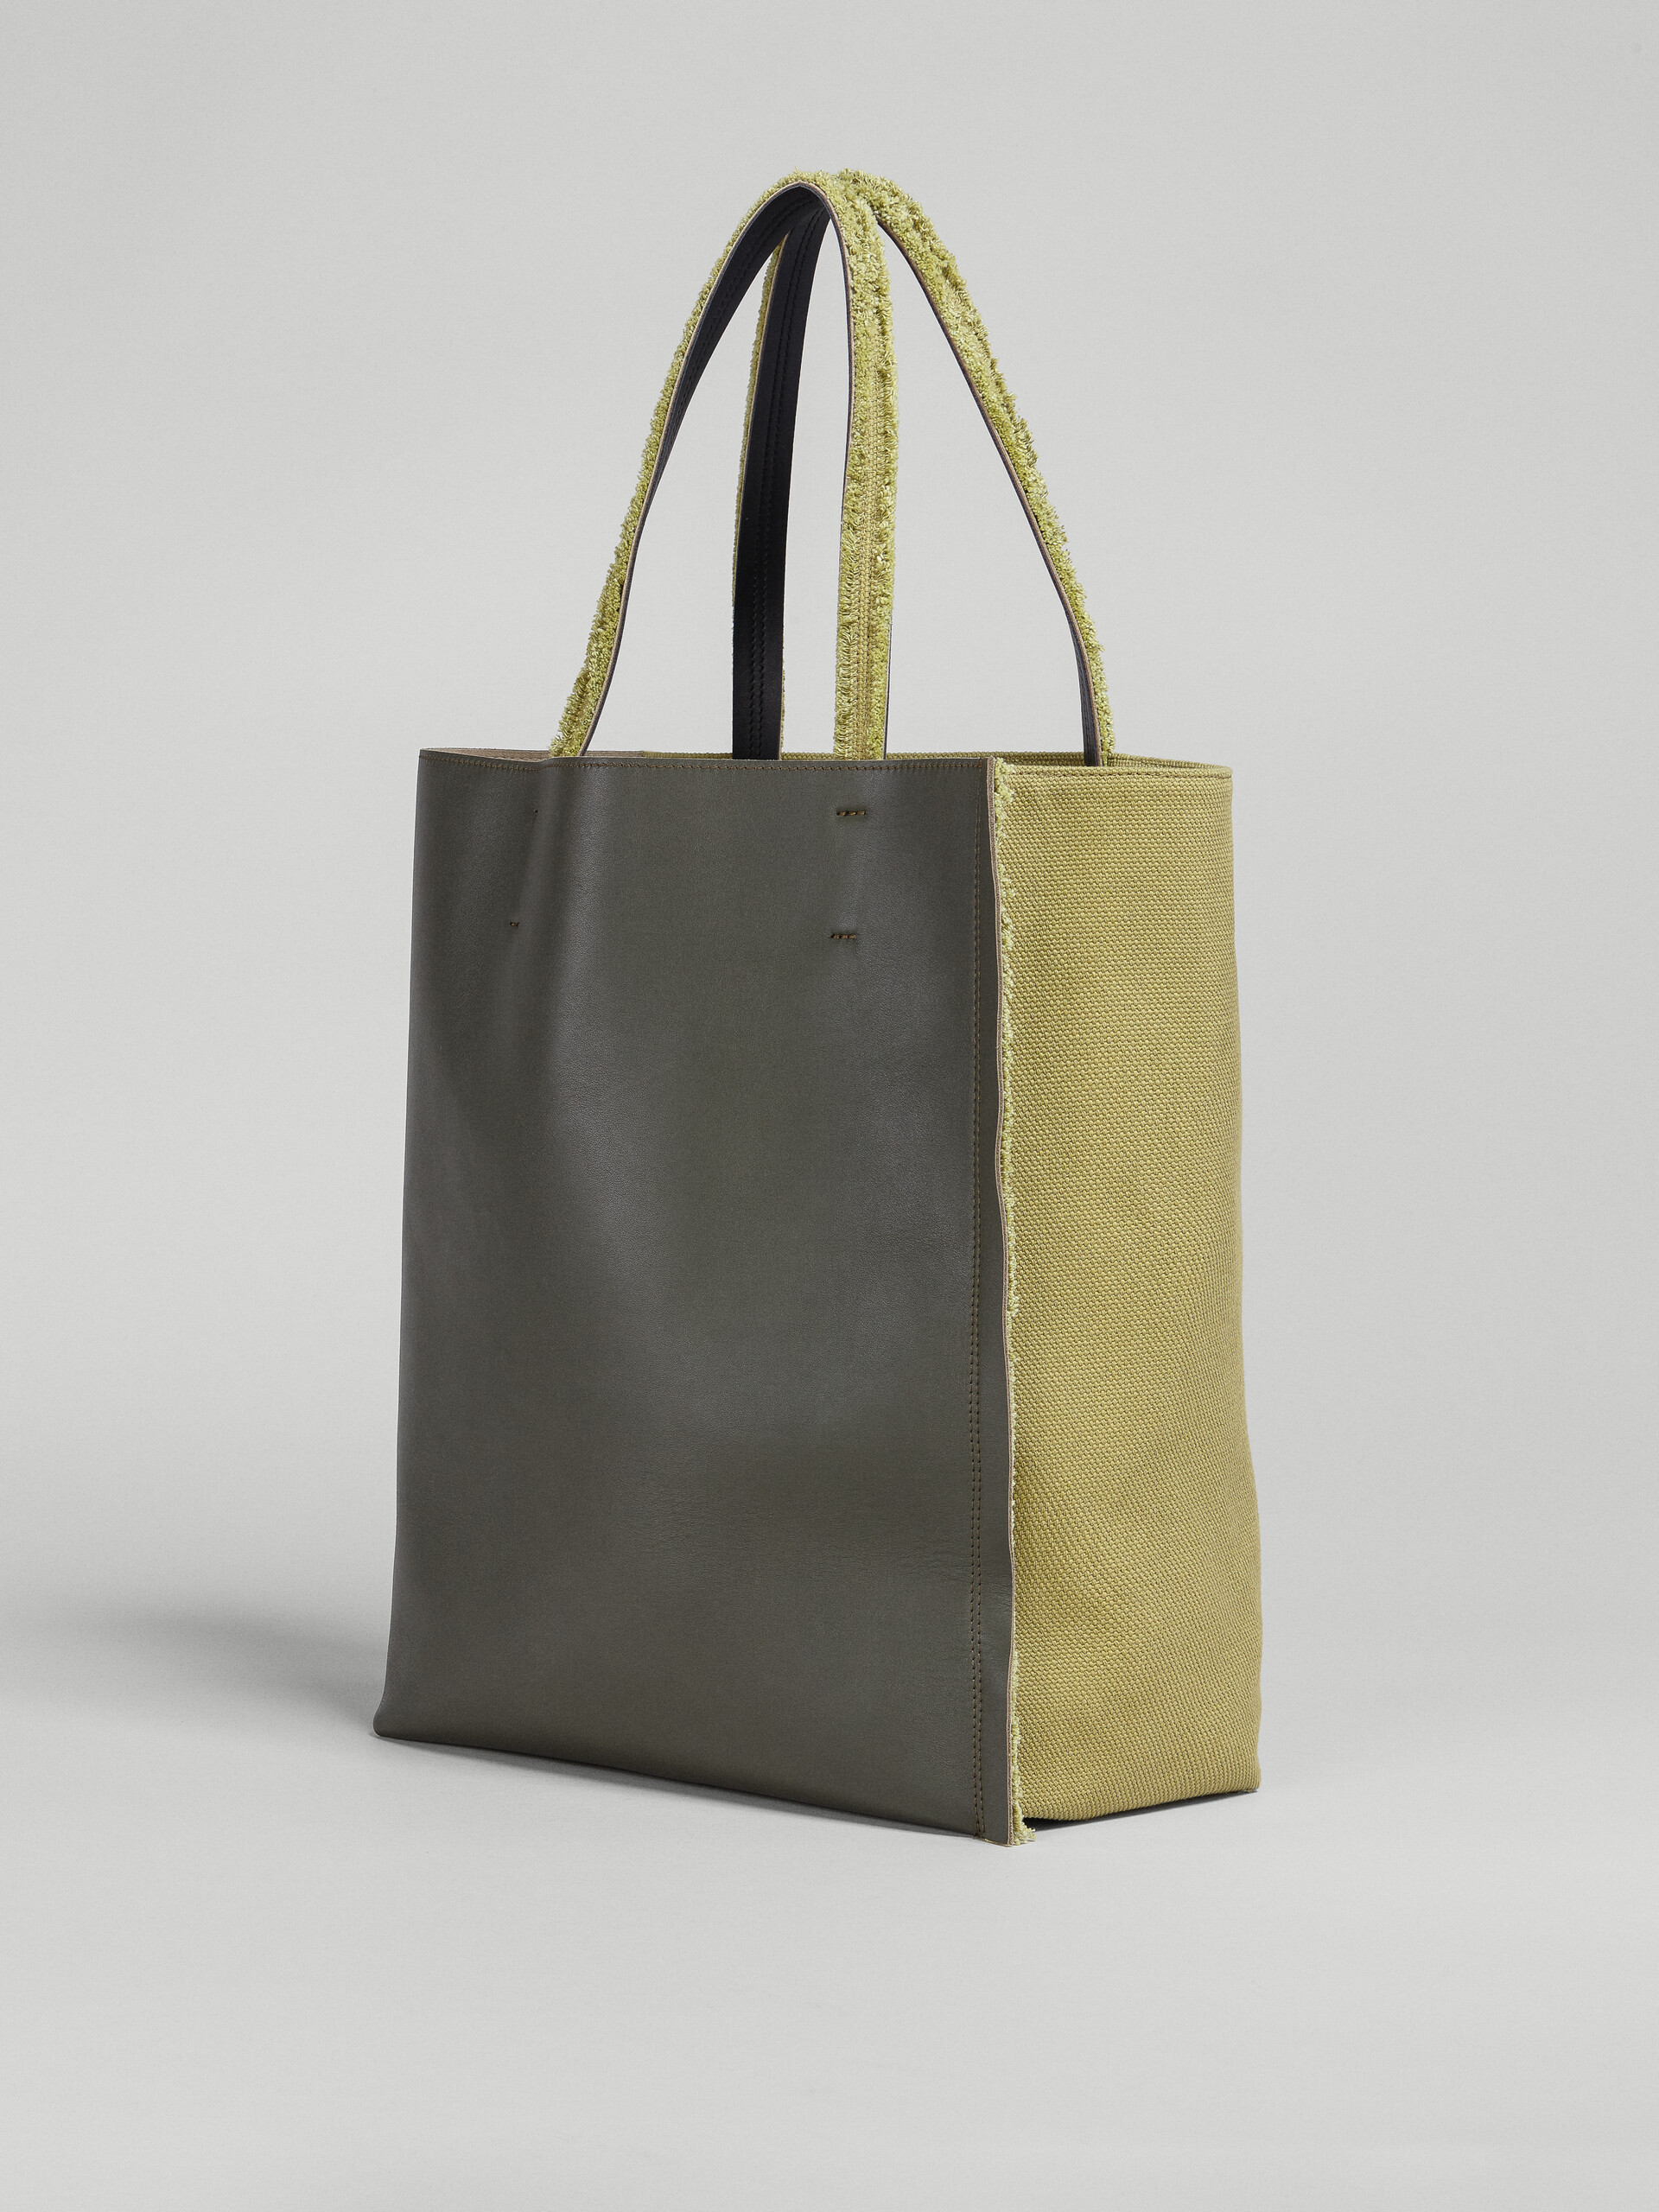 MUSEO SOFT large bag in green leather and canvas